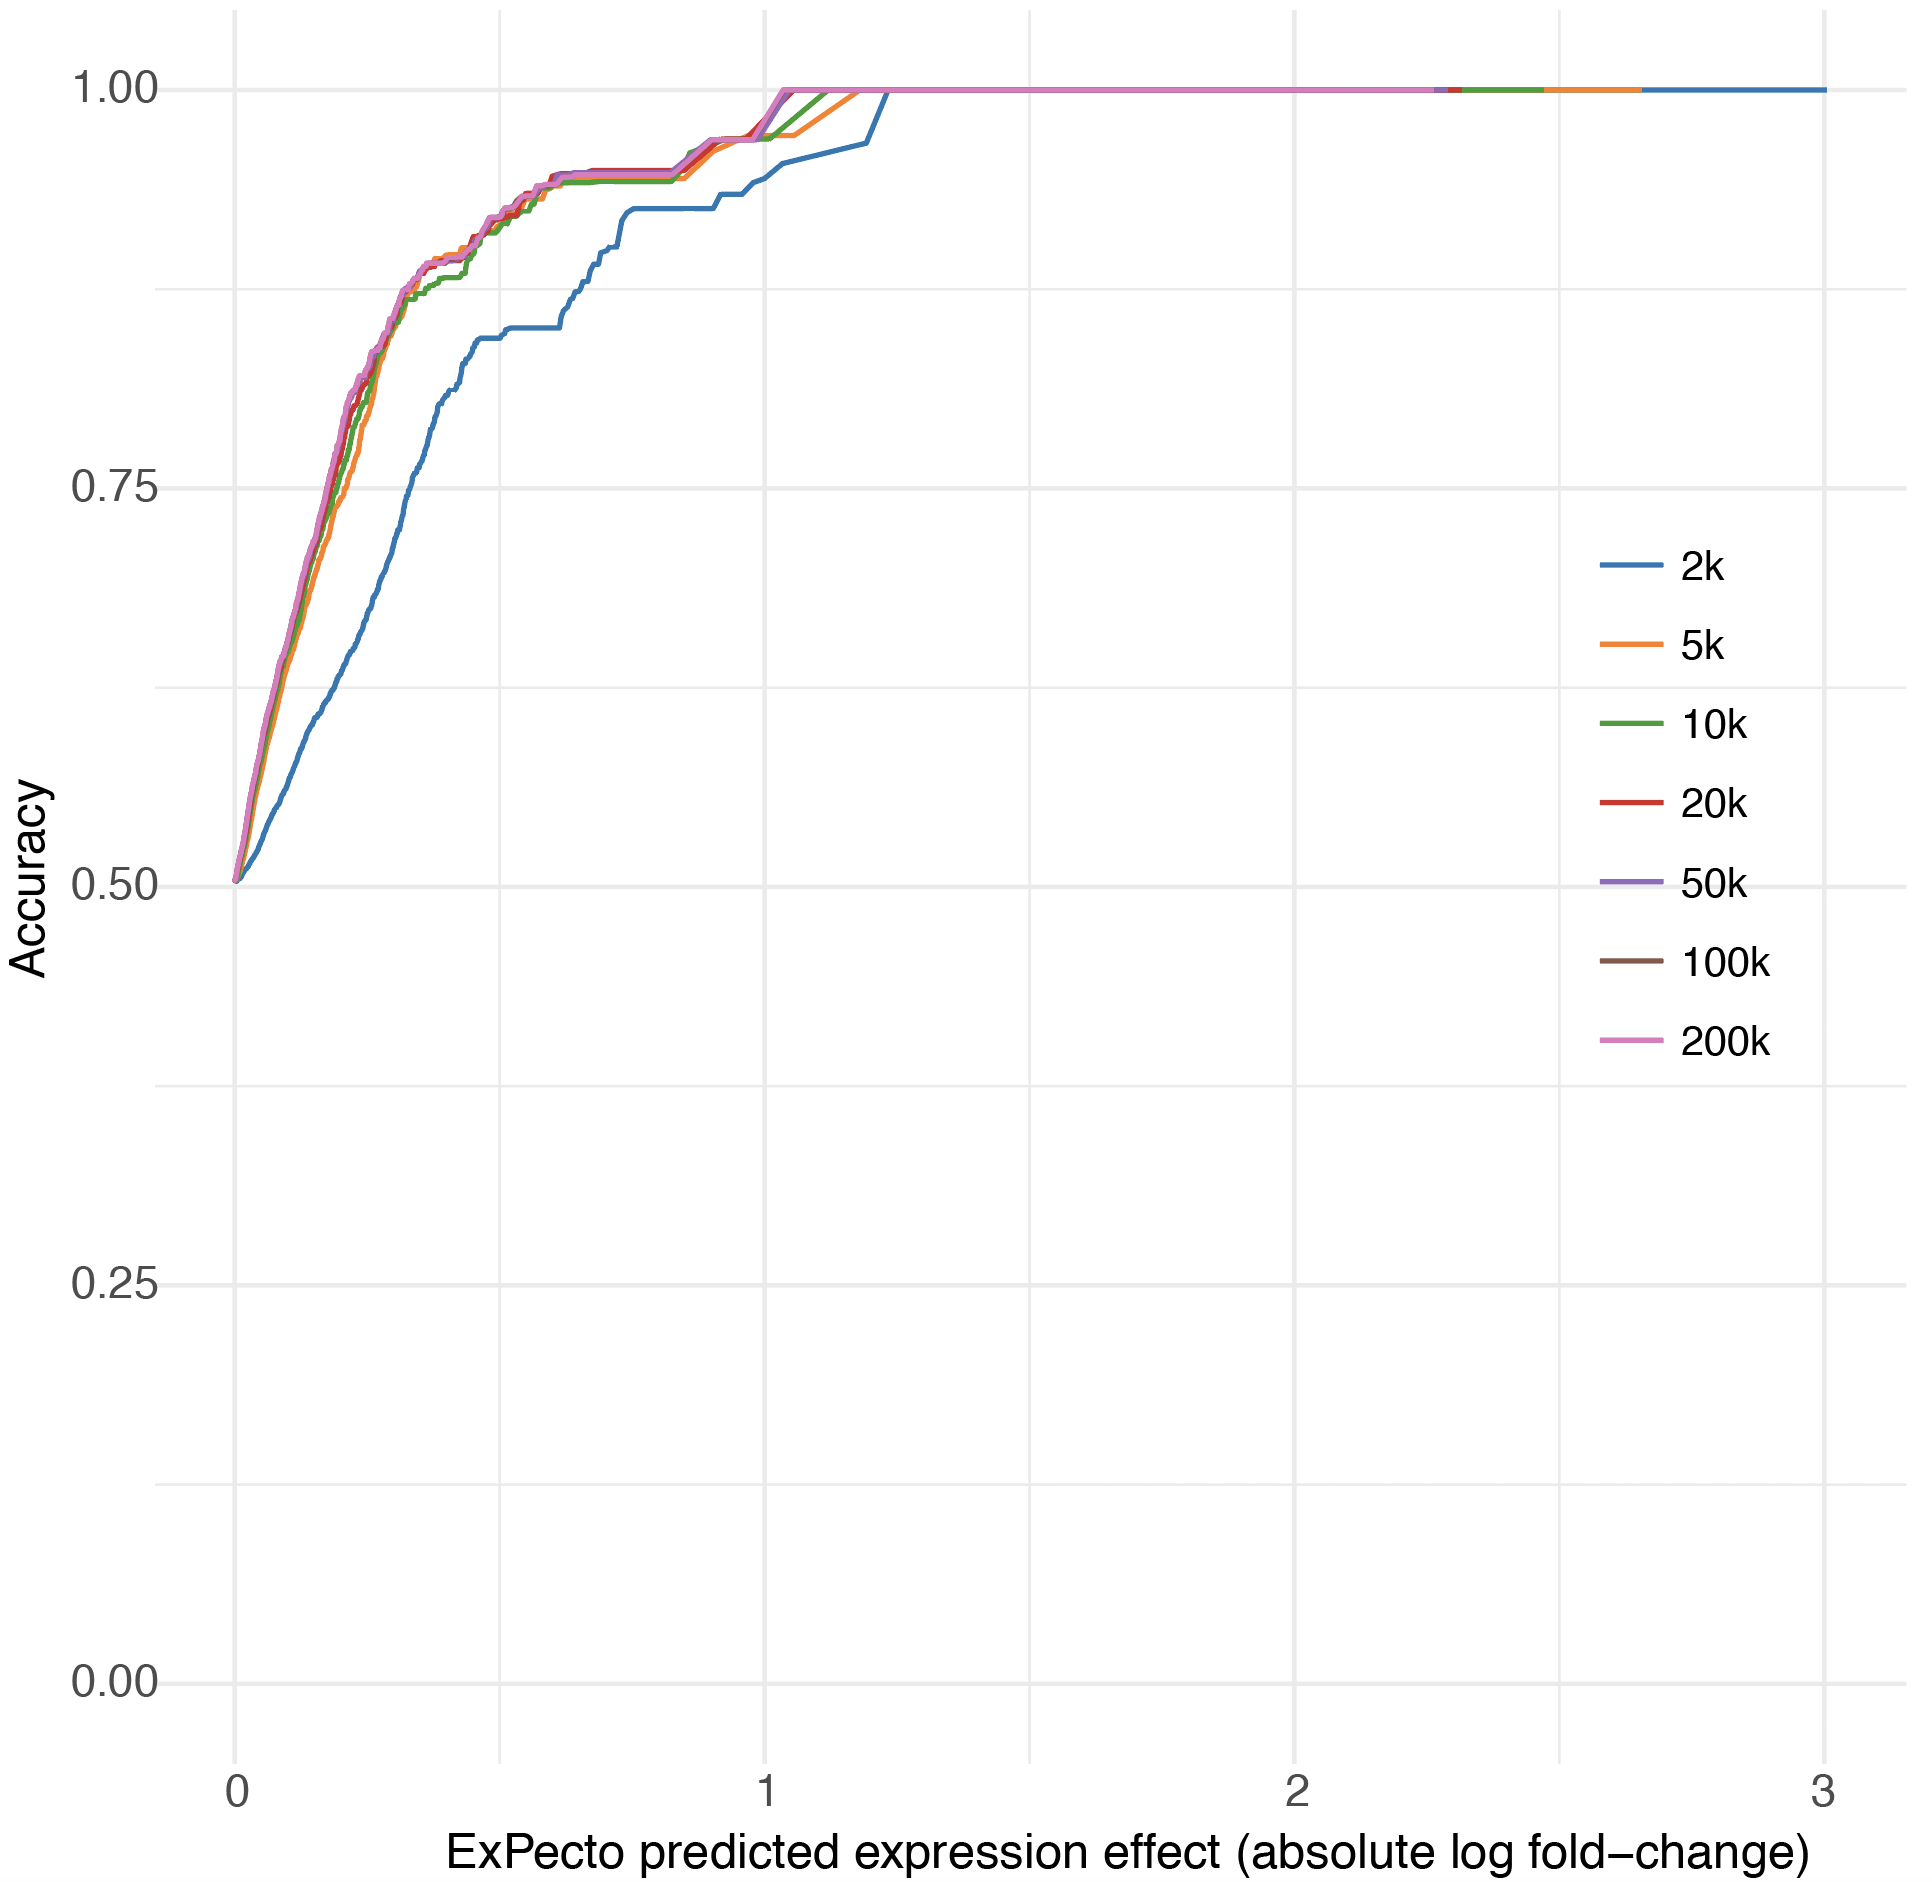 Comparison of ExPecto eQTL prediction performance across models trained with different sequence window sizes.